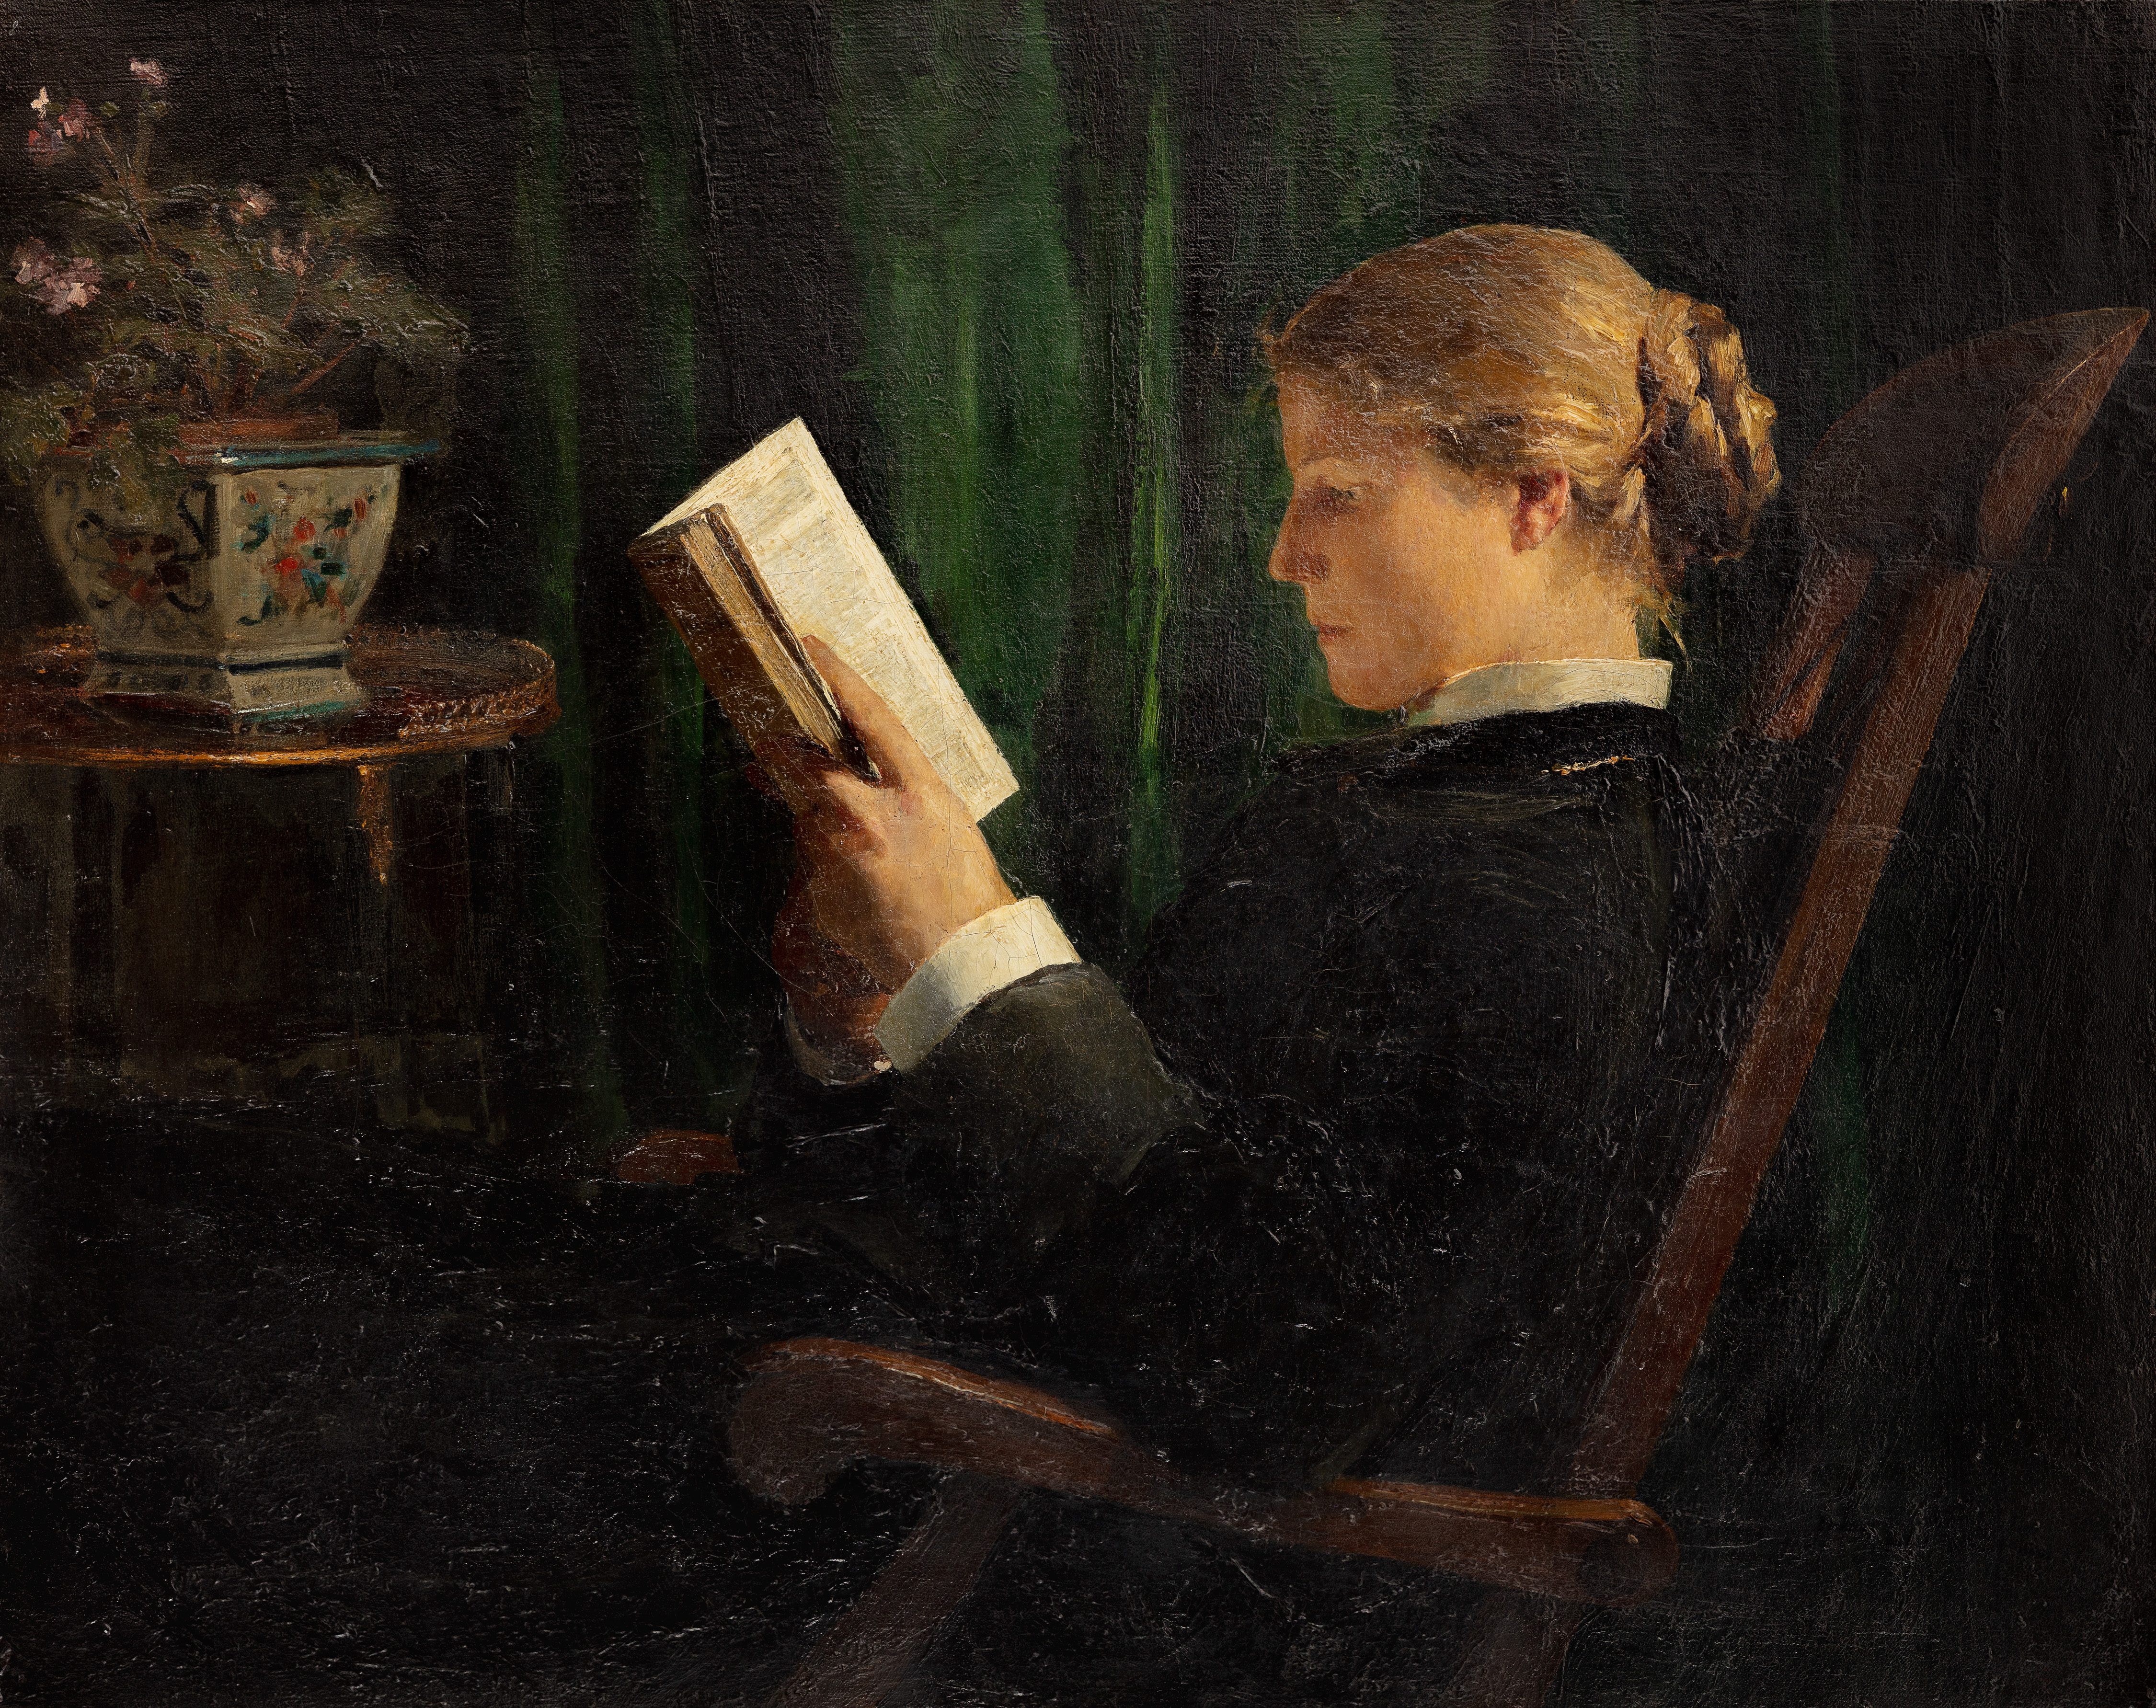 Albert Anker's "The Reader" (Die Lesende), 1883. The exhibition at the Bern Museum of Fine Arts highlights the artist as a promoter of literacy for women when this idea was a taboo.